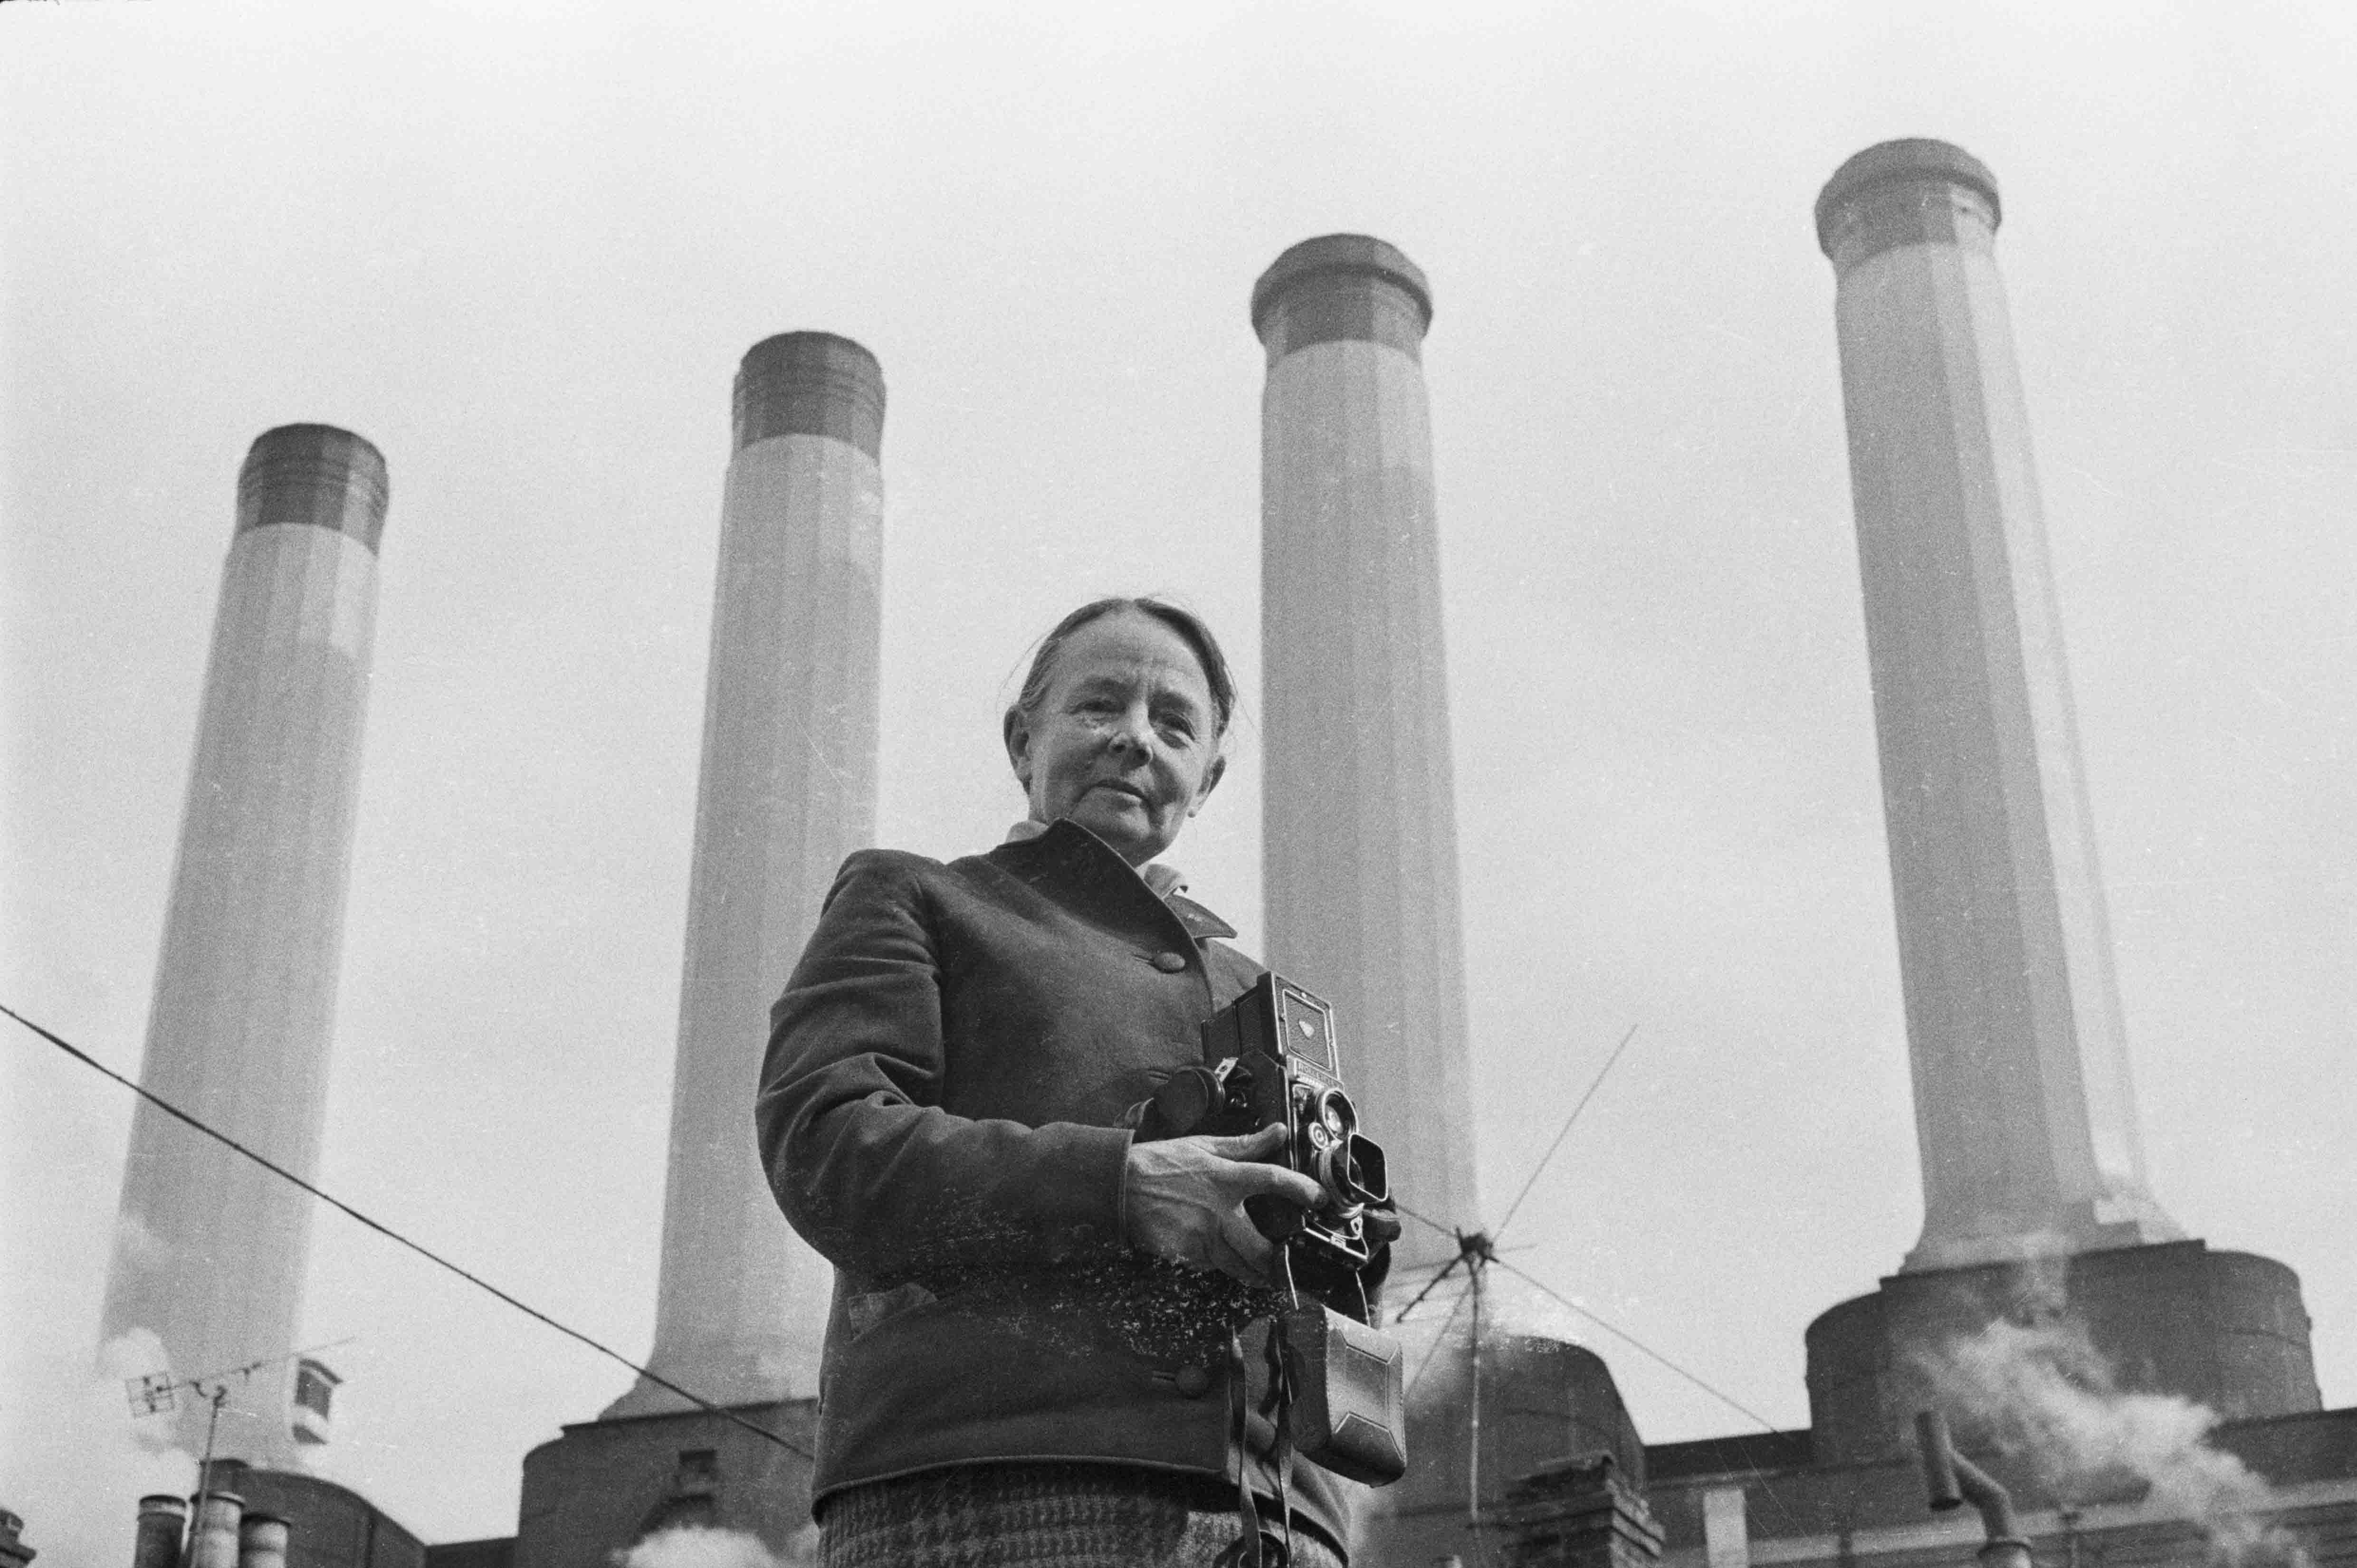 Woman holding a camera standing in front of four chimneys of a power station